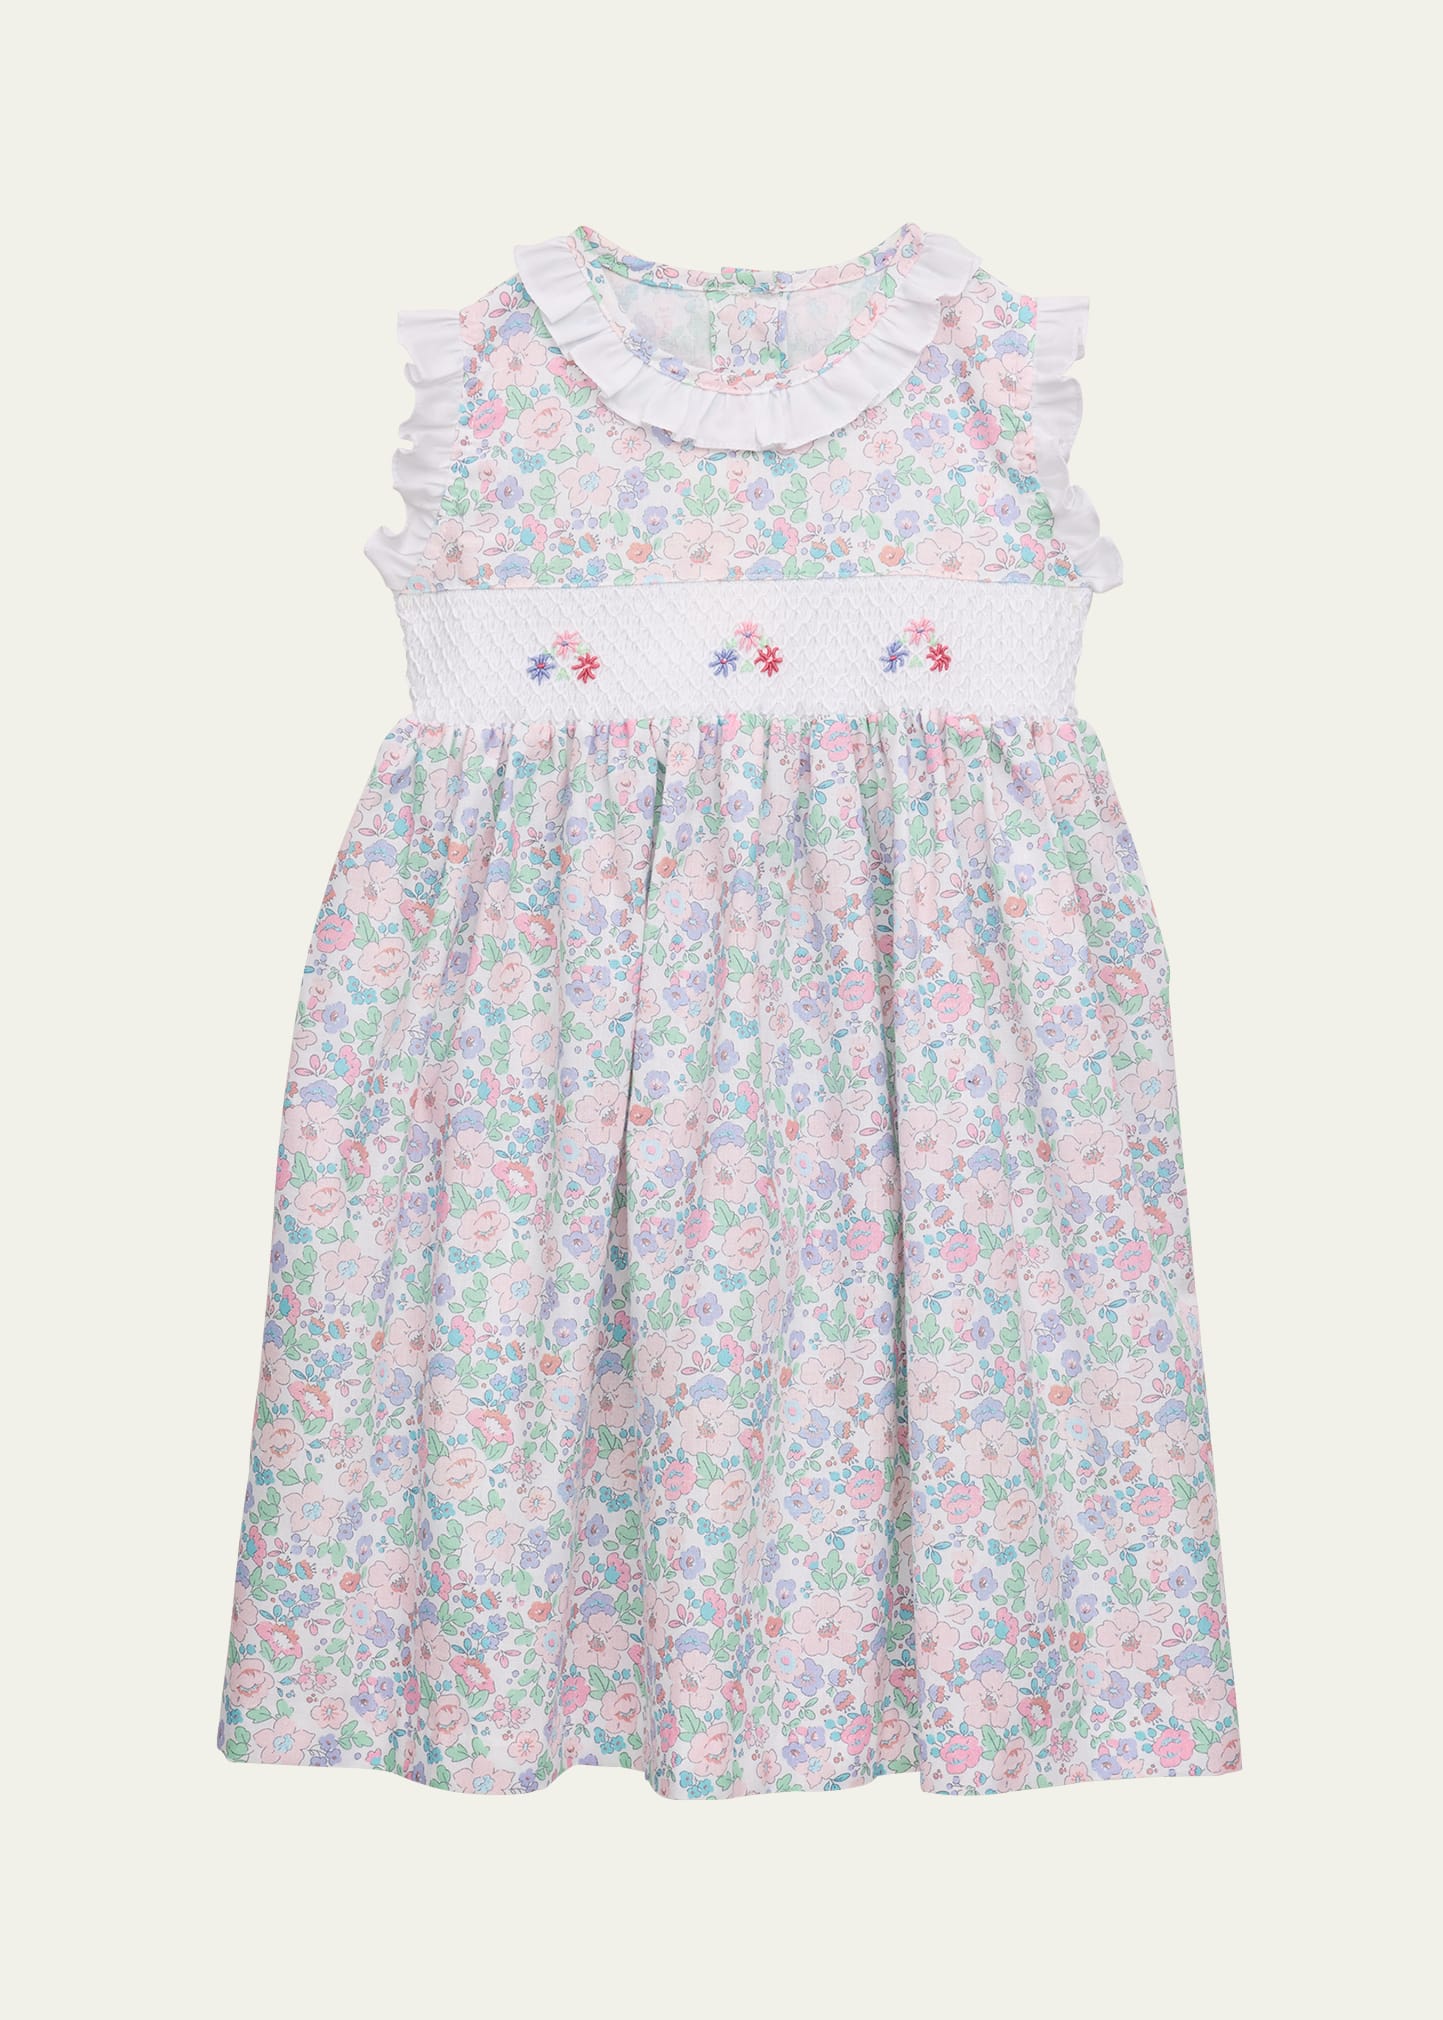 Girl's Cherry Embroidered Collared Dress, Size 12M-10